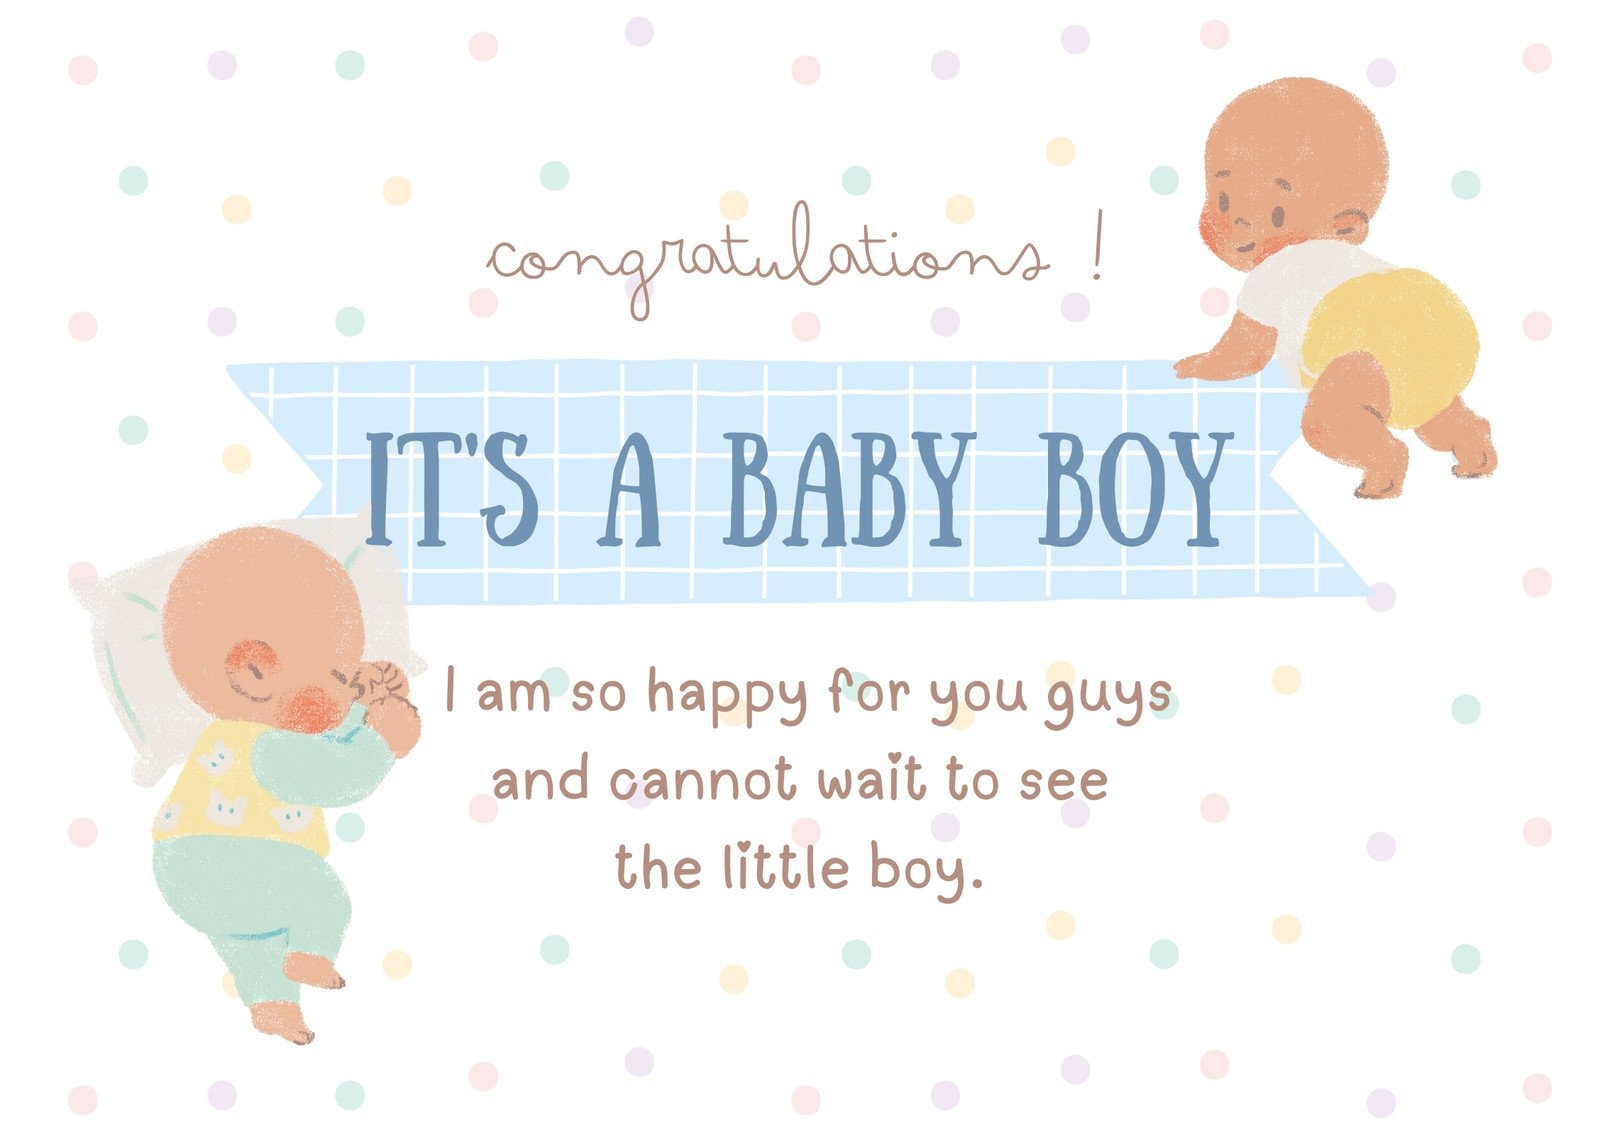 Congratulatory Images for Baby Boys - Over 999 Top Picks in Full 4K